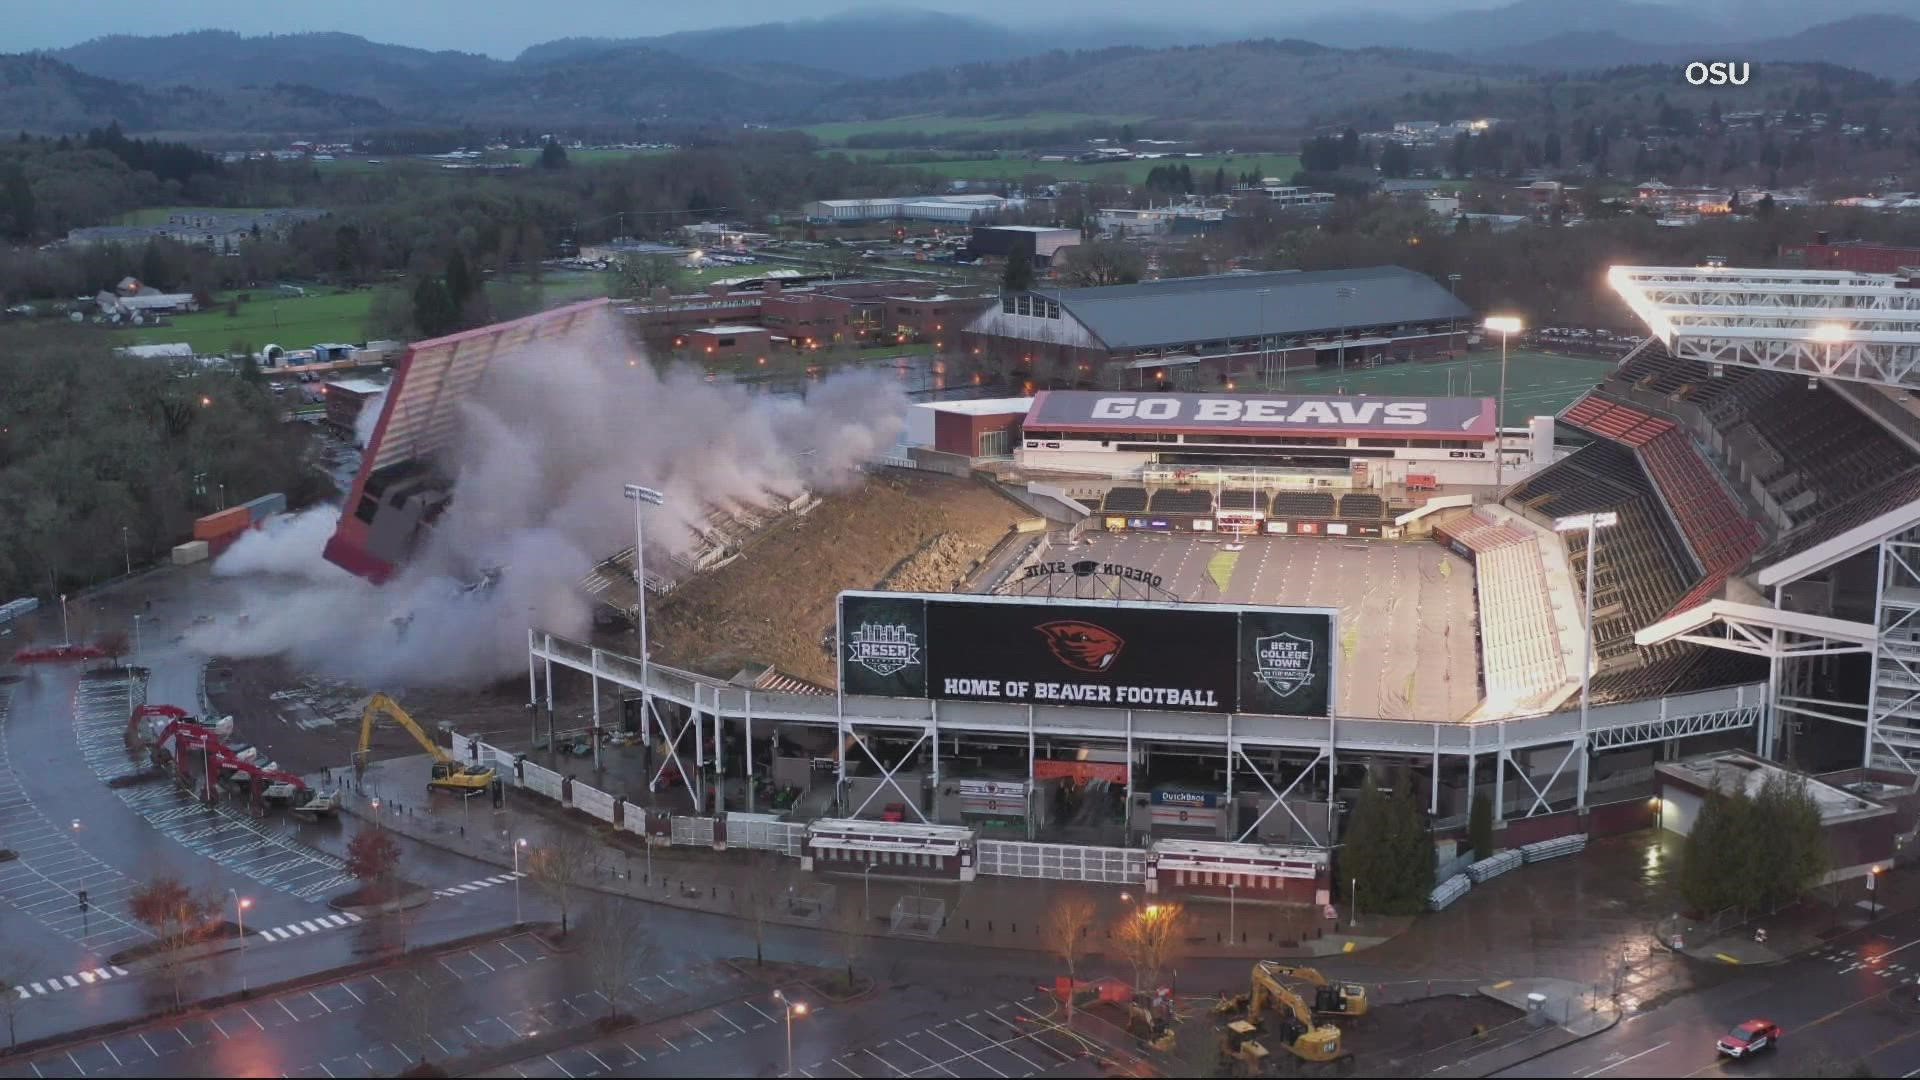 Crews imploded the oldest portion of OSU’s Reser Stadium to make room for a planned renovation project. KGW's Devon Haskins reports.